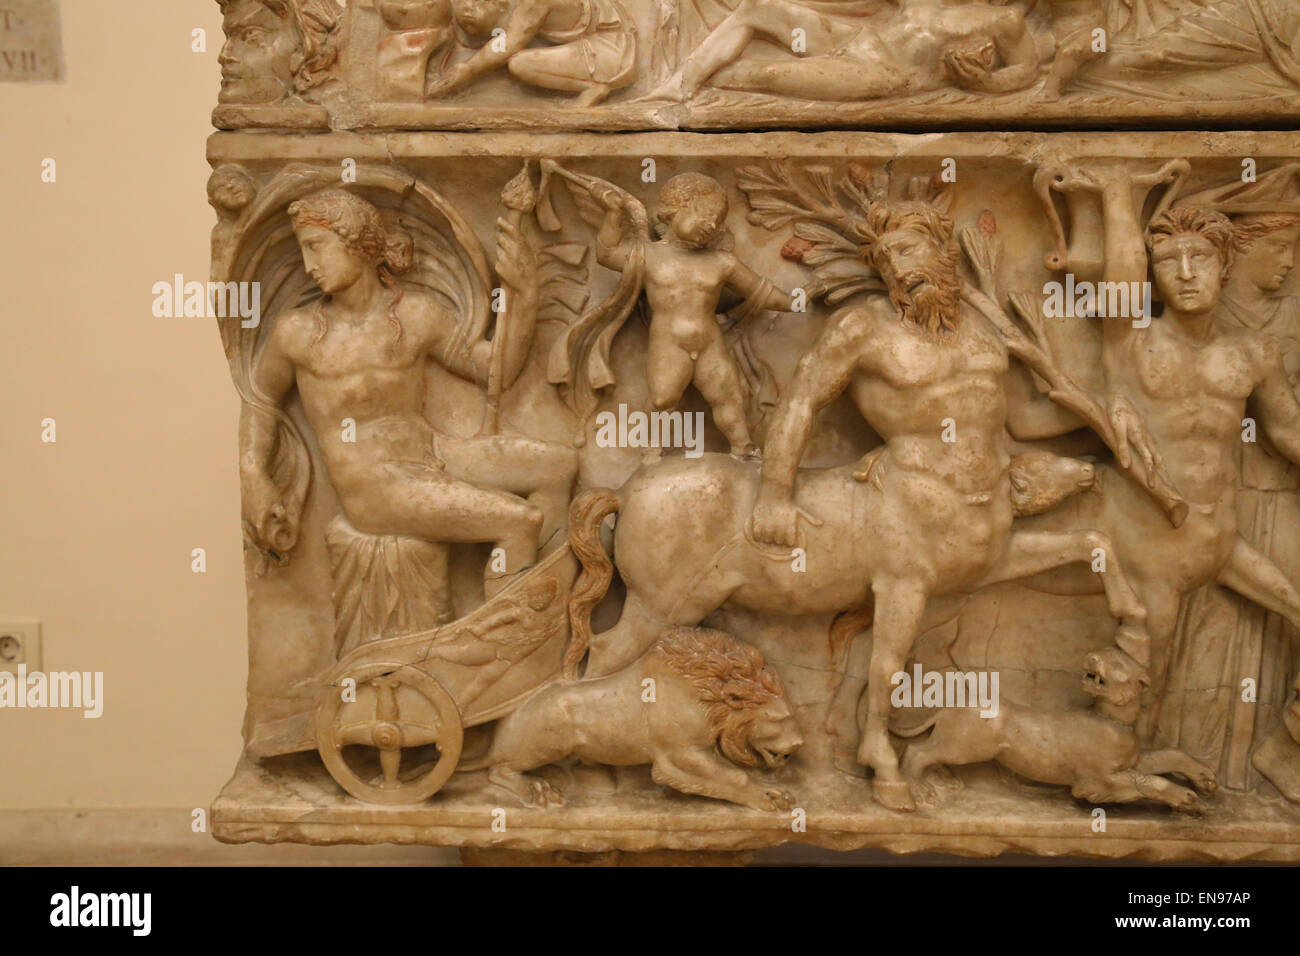 Roman art. Sarcophagus with Dionysian procession. Dionysus on the chariot,  Cupido, lion, centaurs and panther. Detail. Stock Photo